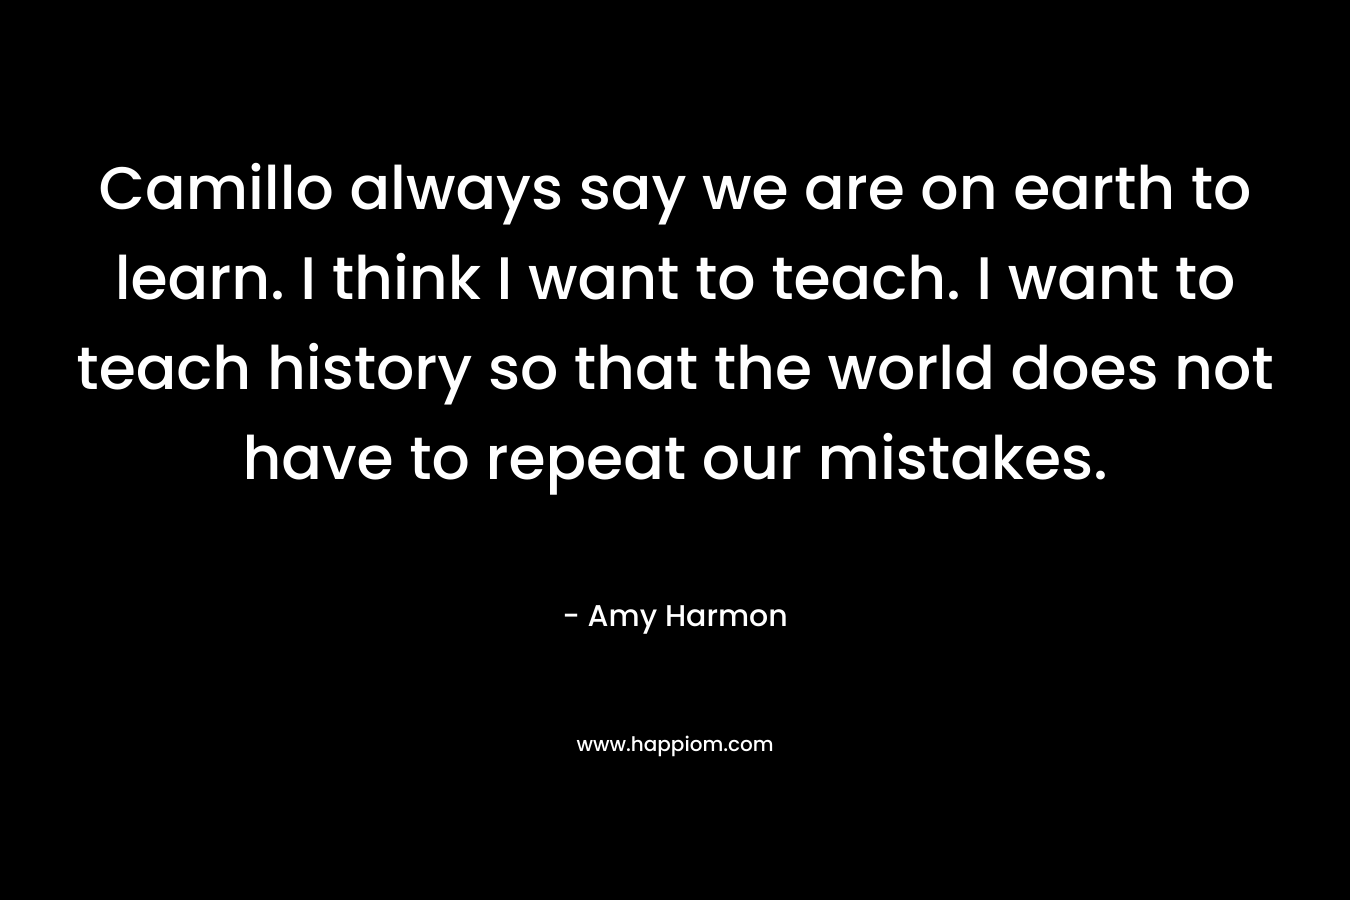 Camillo always say we are on earth to learn. I think I want to teach. I want to teach history so that the world does not have to repeat our mistakes. – Amy Harmon